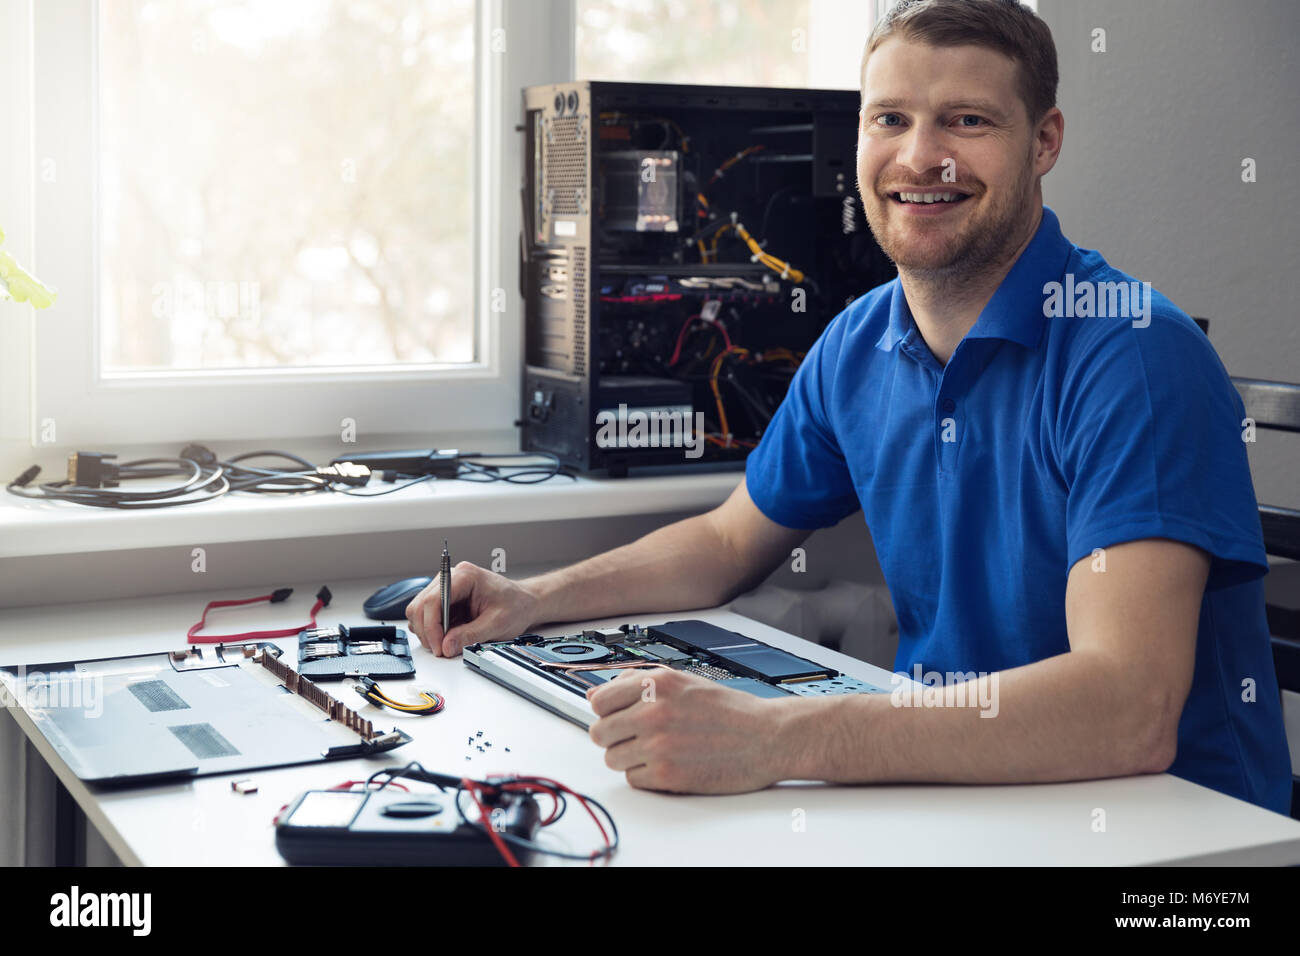 smiling young electronics technician at work Stock Photo